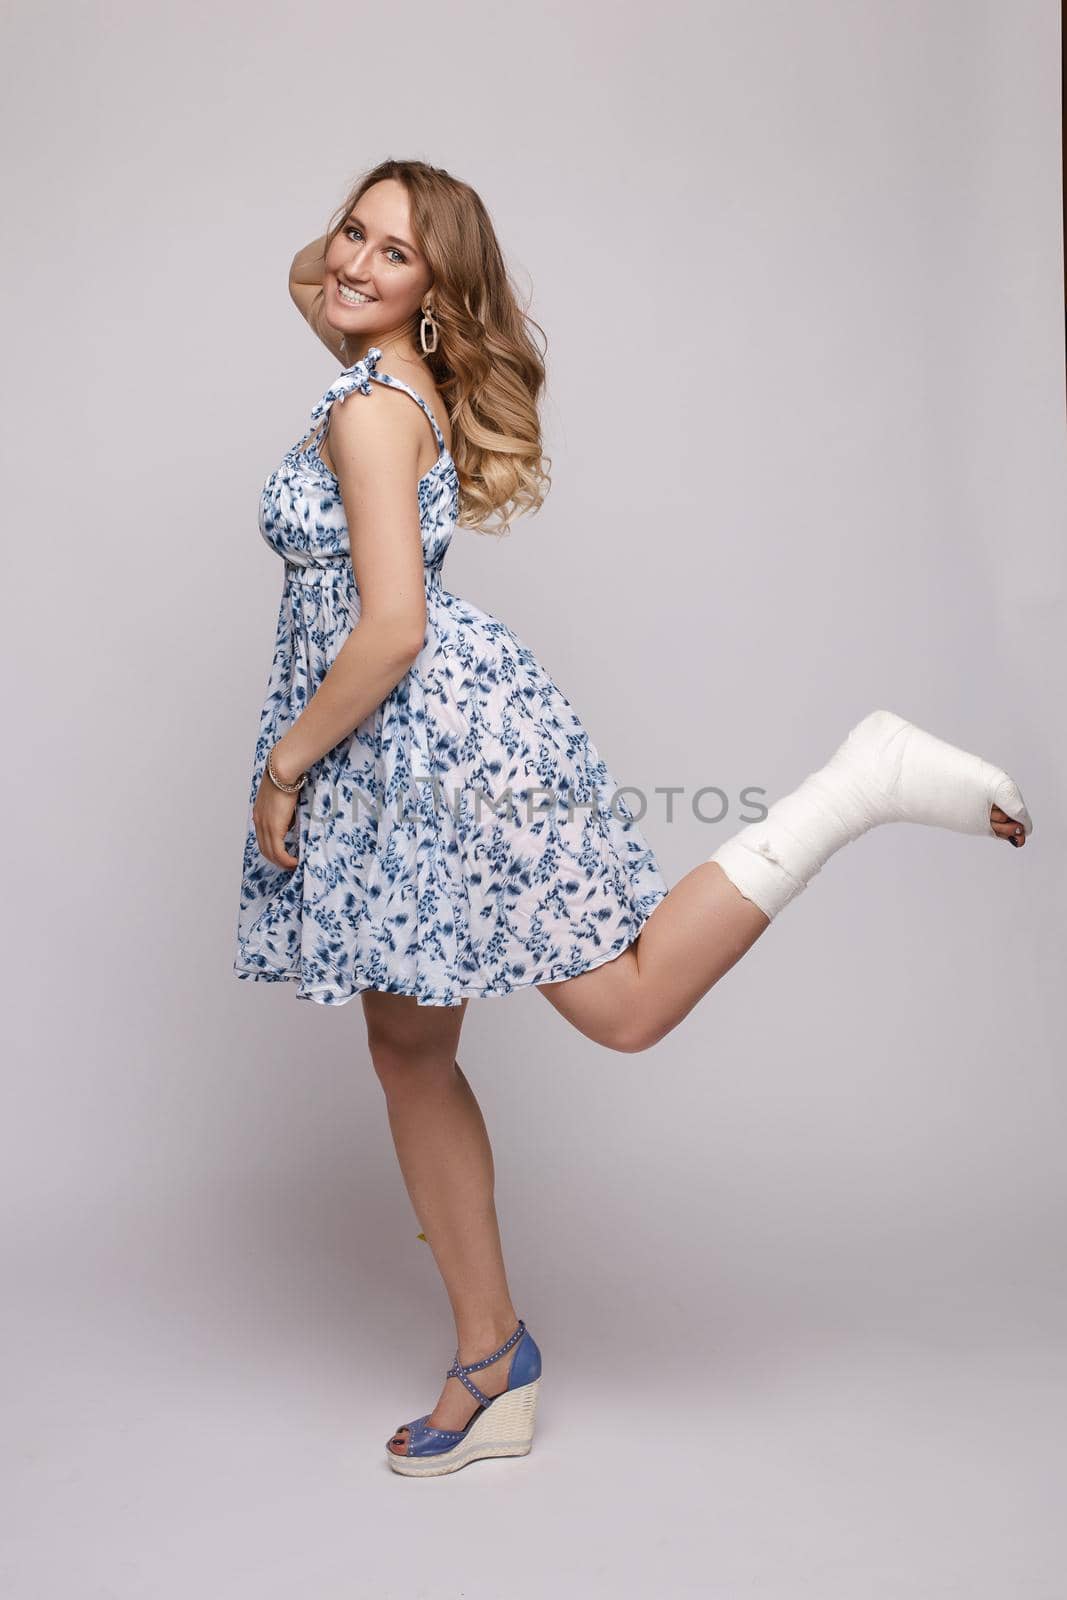 Pretty woman in short dress posing with broked leg by StudioLucky